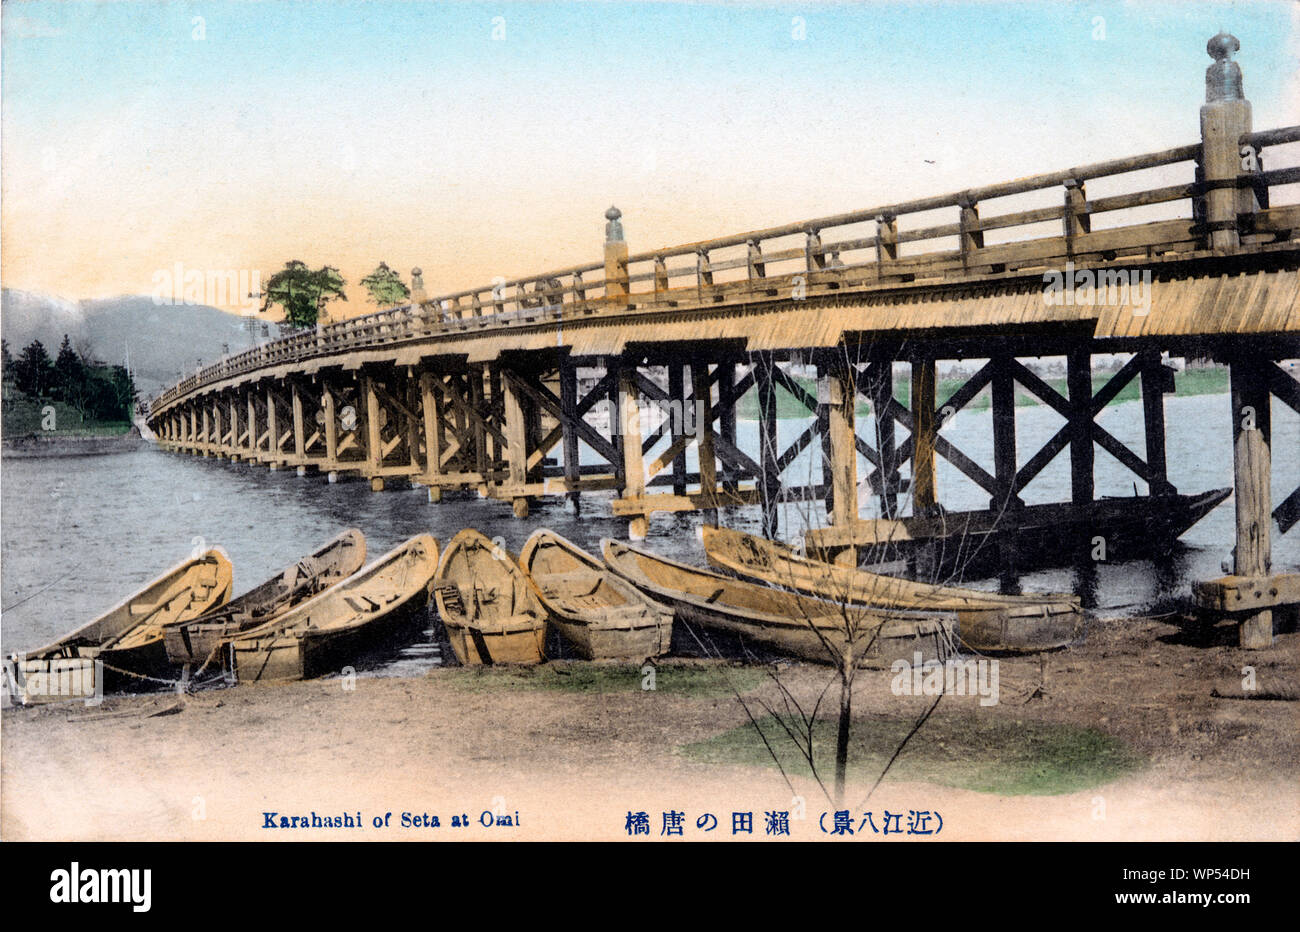 [ 1910s Japan - Japanese Wooden Bridge ] —   Seta no Karahashi Bridge in Omi, Shiga Prefecture.  The bridge is one of the Eight Views of Omi (Omi Hakkei). The Omi Hakkei are the eight most beautiful scenes in the southern part of Lake Biwa.  They are believed to have been selected in the 13th century and became especially well-known through woodblock prints of the same name by Japanese ukiyo-e artist Ando Hiroshige (1797-1858), also known as Utagawa Hiroshige.  20th century vintage postcard. Stock Photo